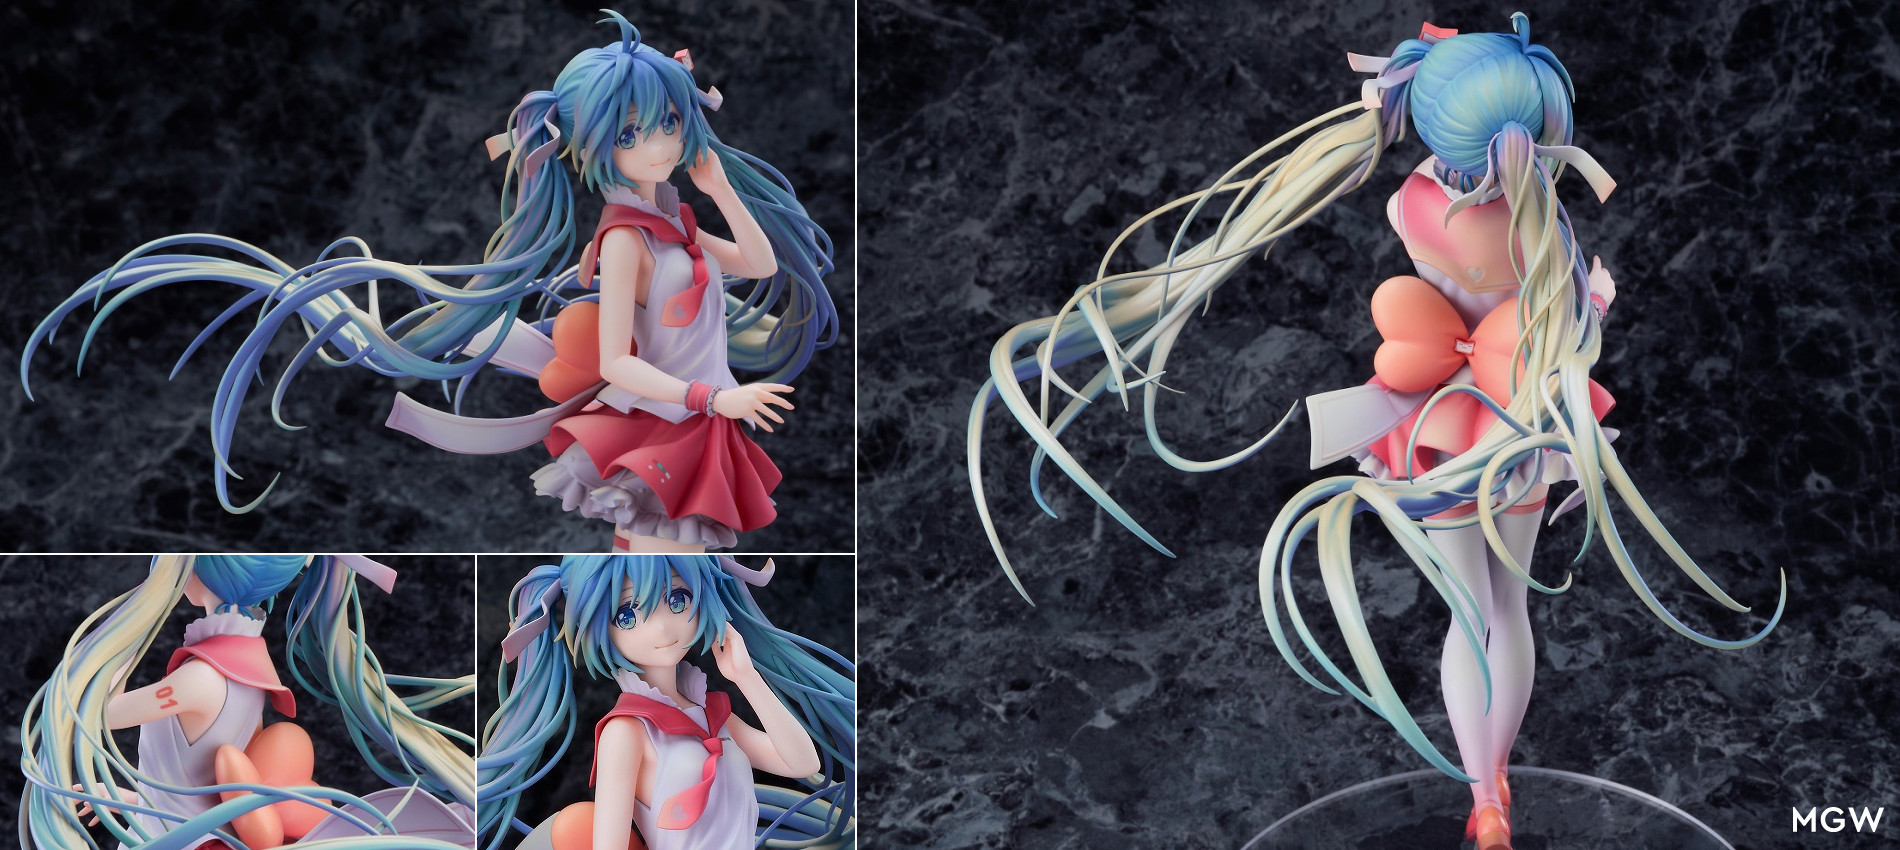 Hatsune Miku The First Dream Ver. by Max Factory based on illustration by lococo